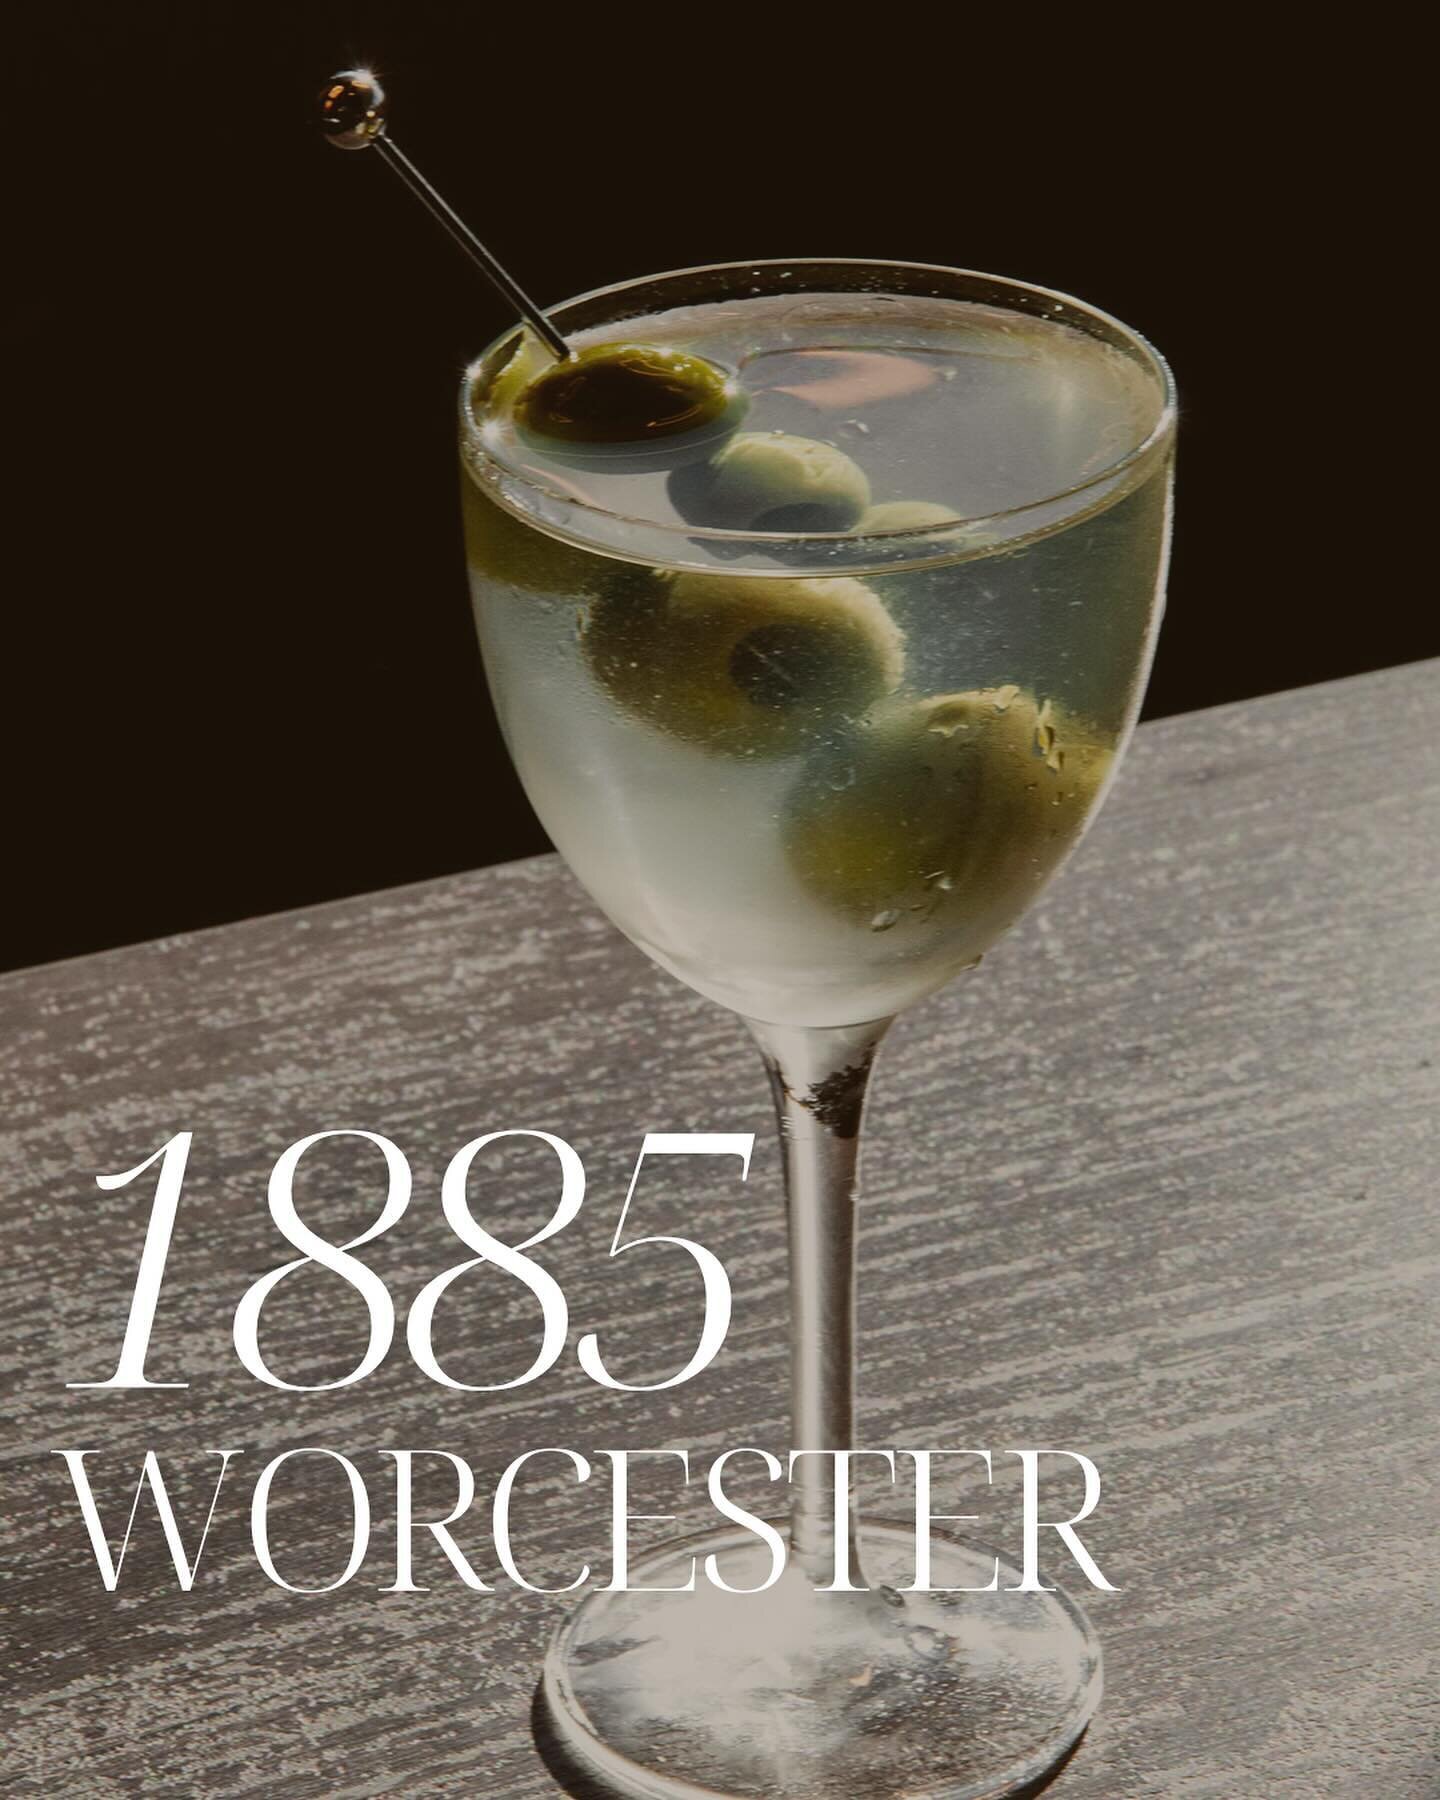 In honor of our client @1885worcester grand opening today we&rsquo;re sharing the photos and website we&rsquo;ve been working on the past few months! 

A brand new bar and restaurant in the heart of the Canal District, 1885&rsquo;s  elevated cocktail